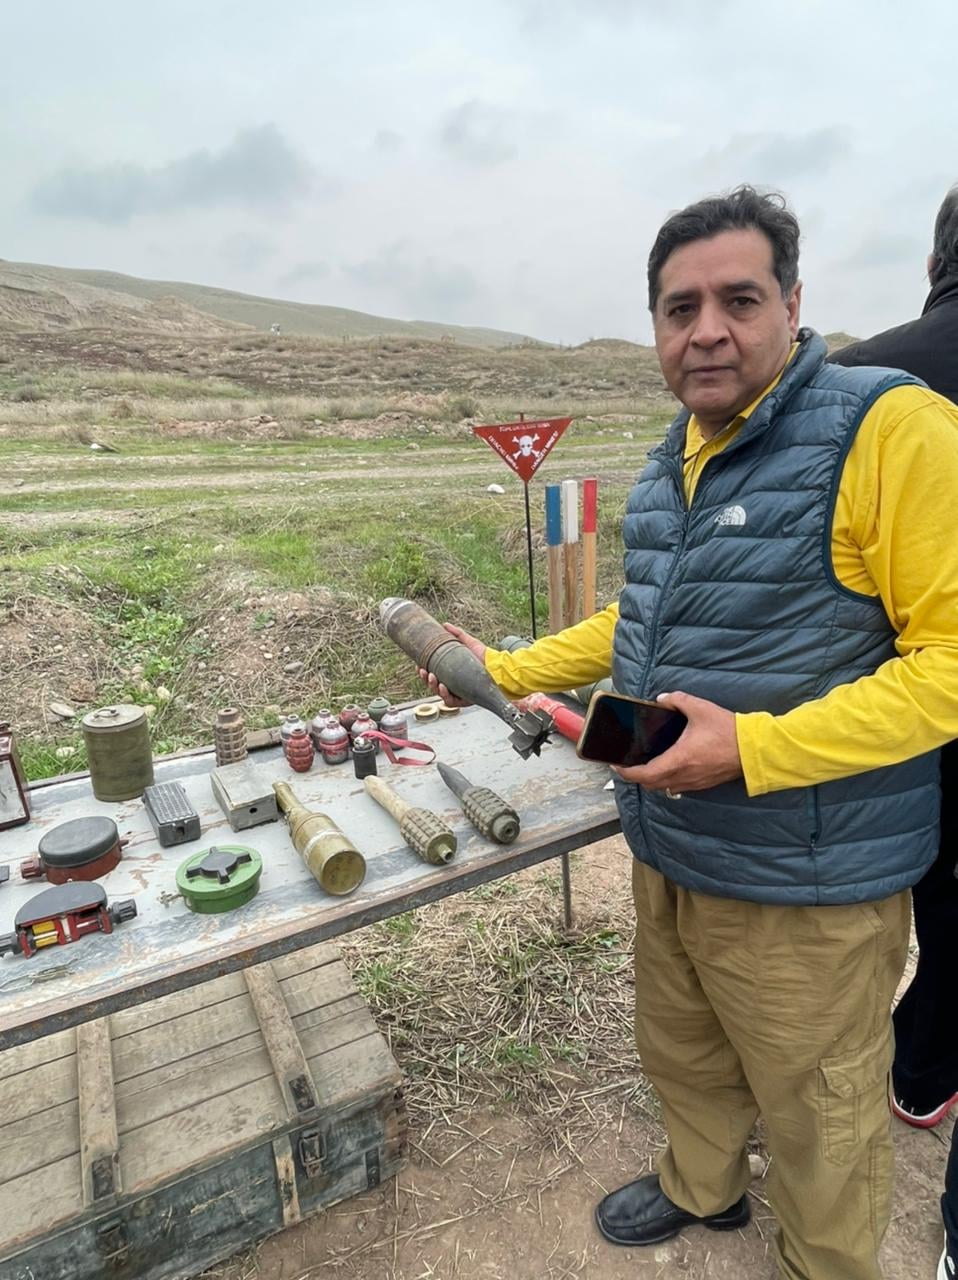 One should remember that Armenia installed over one million anti-tank and anti-personnel mines in territories under its 30 years’ illegal occupation